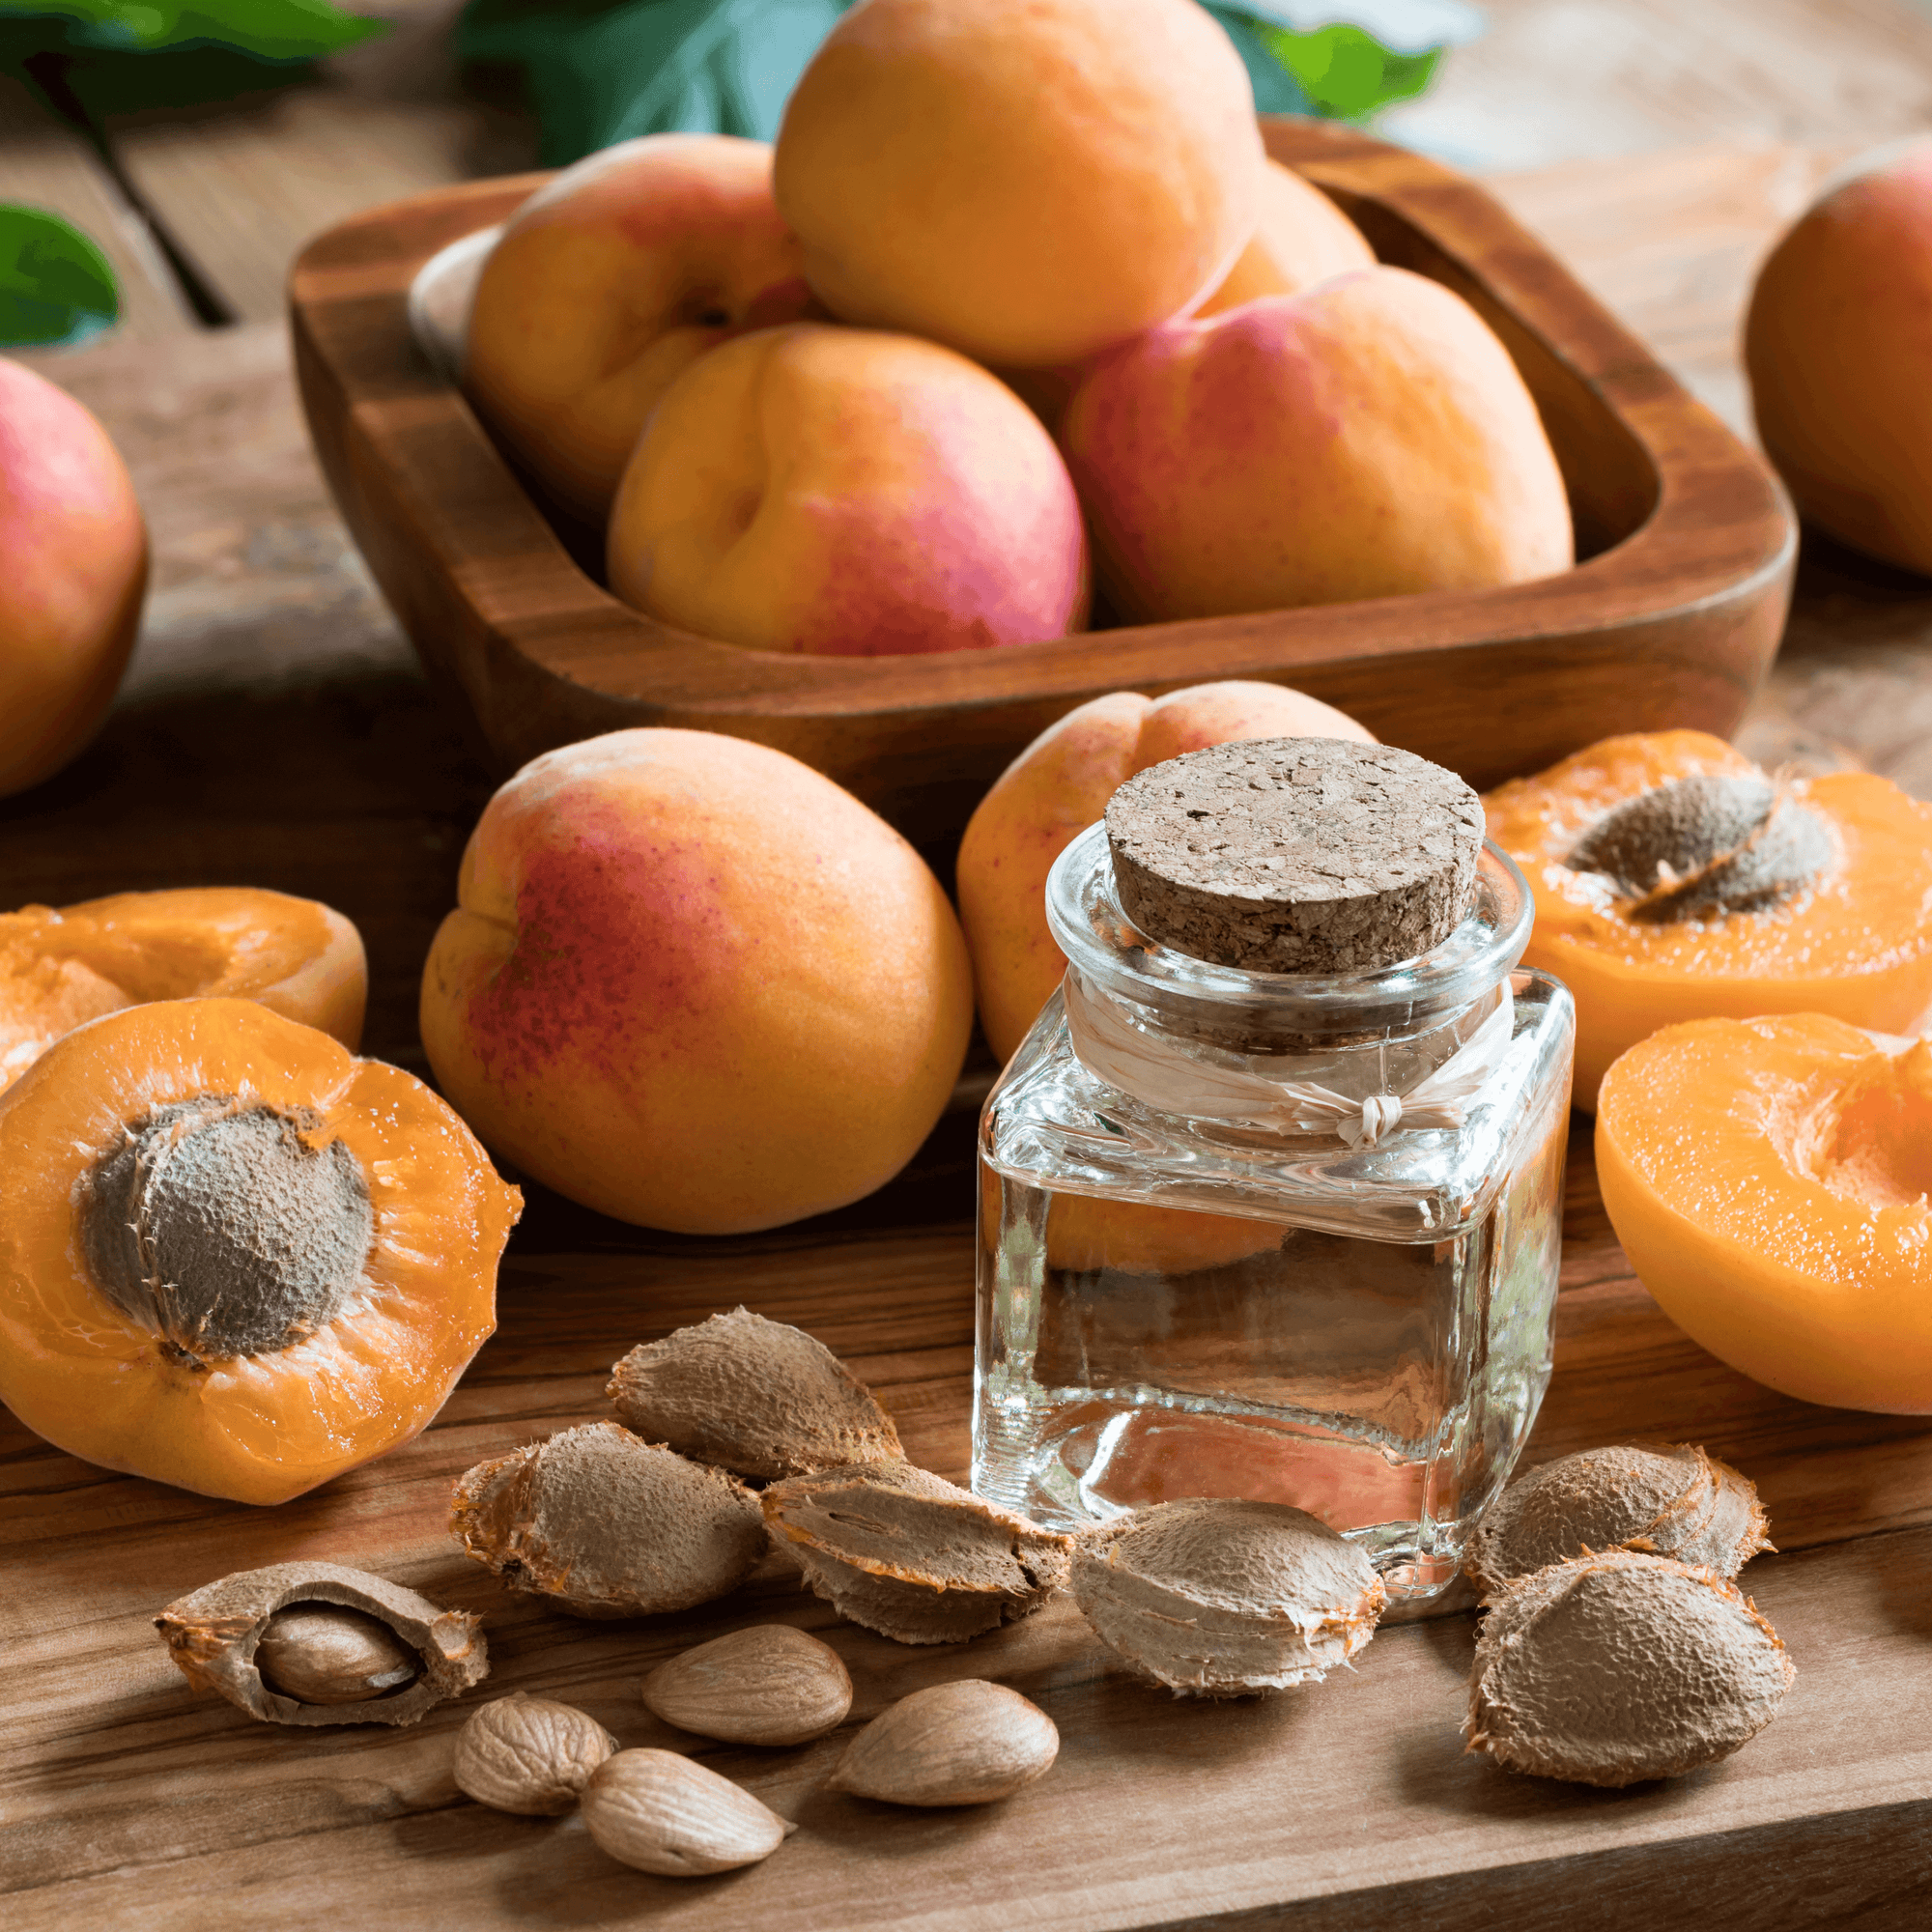 Be Bohemian Botanical Sea Serum Apricot Kernel Oil. A see-through glass, squared off bottle with clear oil inside is corked sitting next to apricot pits in the foreground and an assortment of varying ripeness of apricots on a table and inside a wooden bow